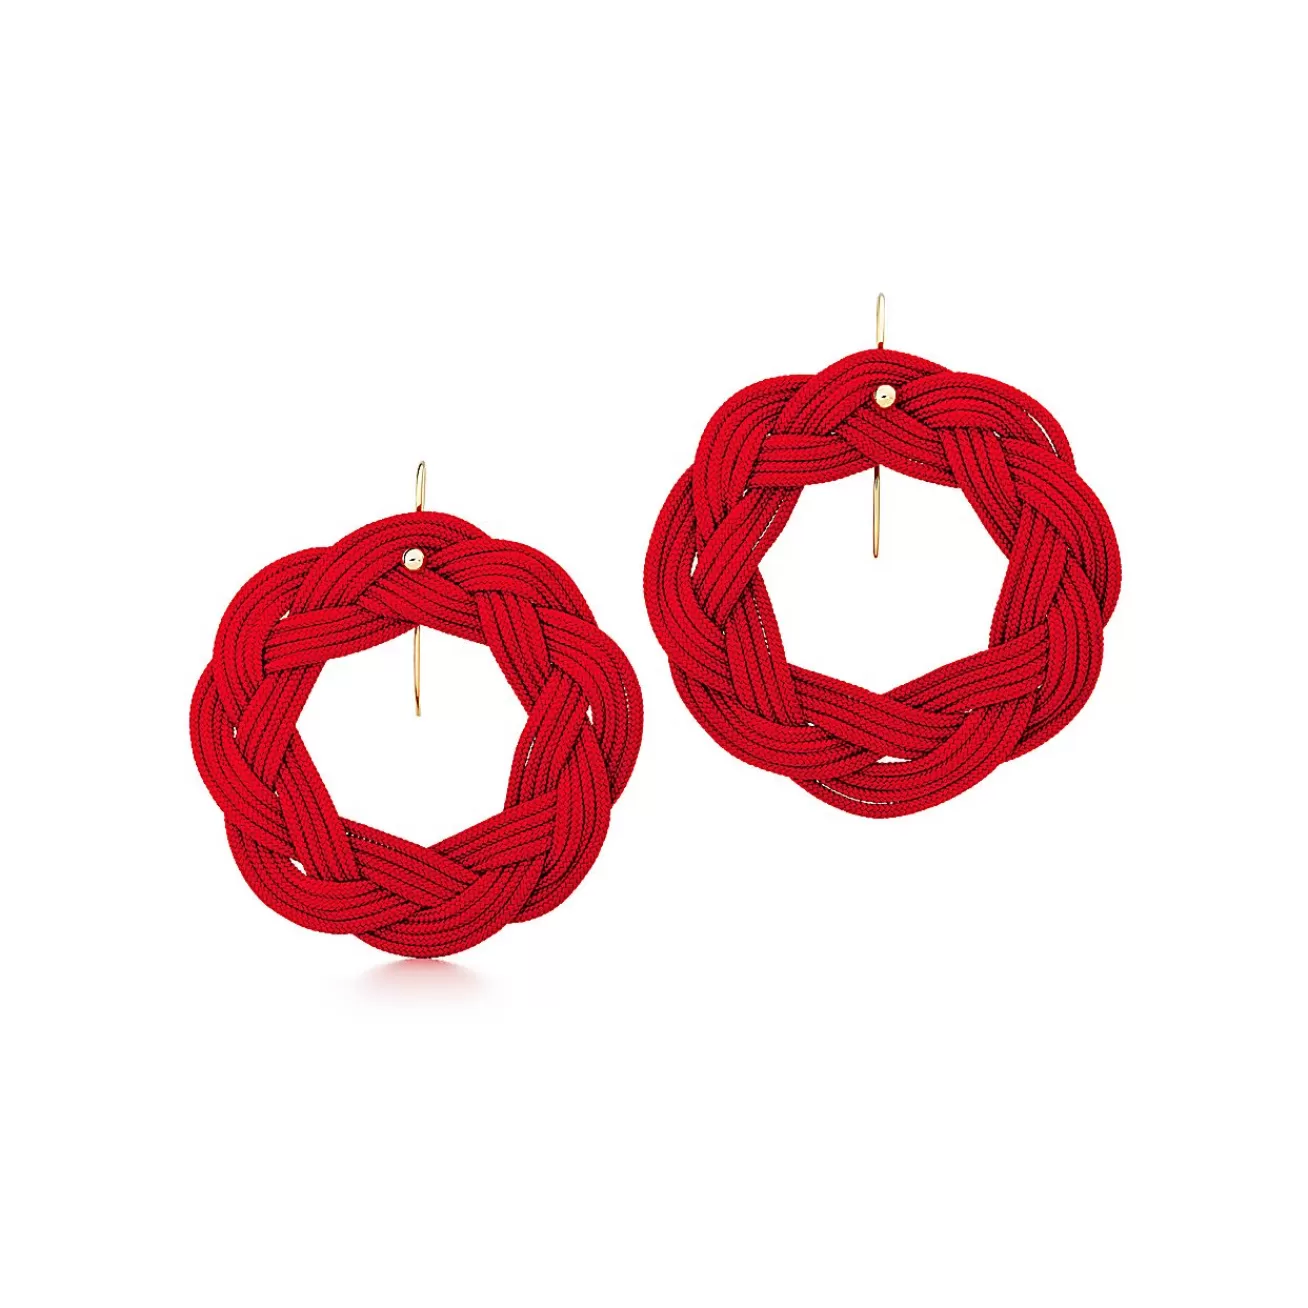 Tiffany & Co. Elsa Peretti® Circle hook earrings in red woven silk with 18k gold. | ^ Earrings | Gold Jewelry